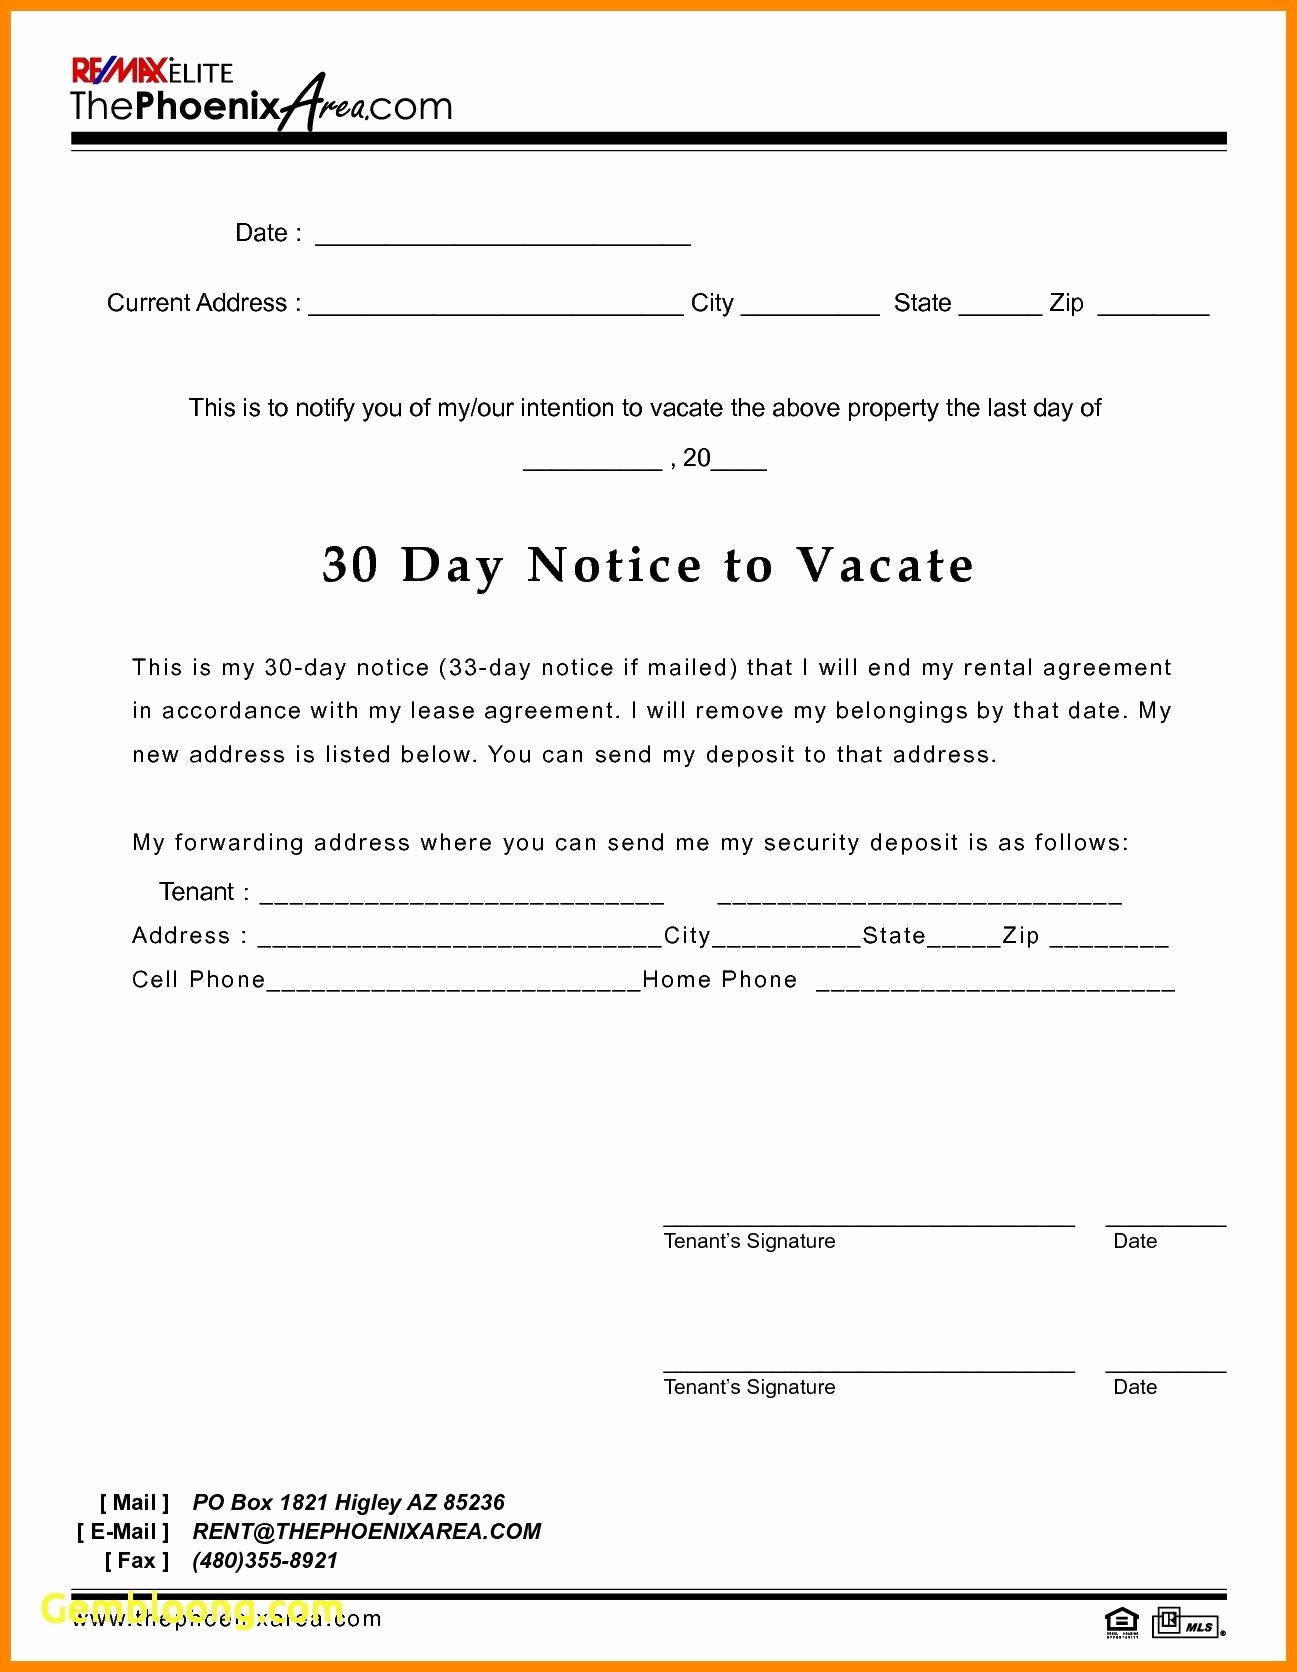 30 Day Eviction Notice Template New Template for 30 Day Notice Free Printable Eviction south